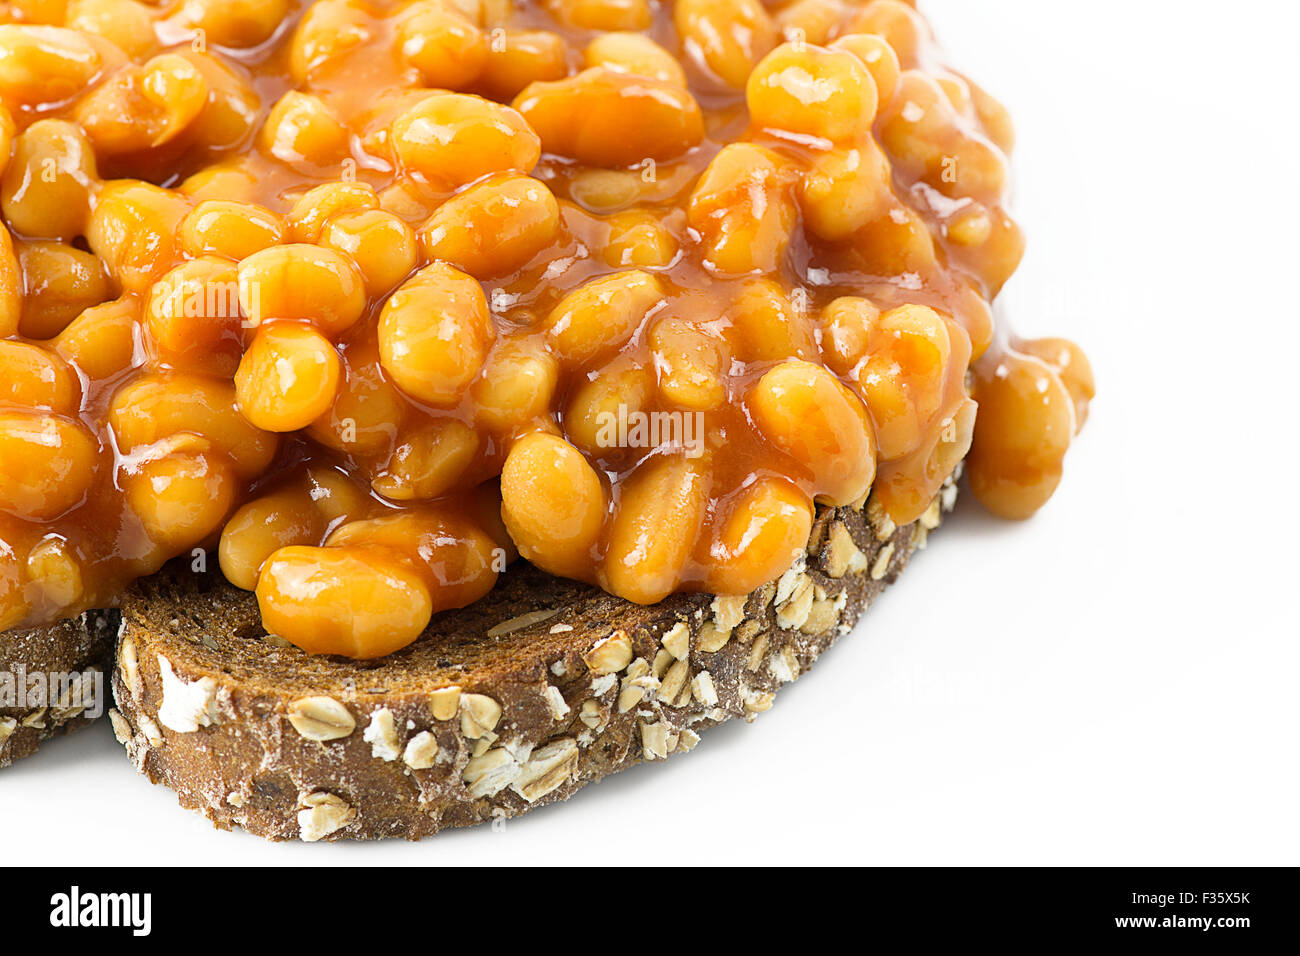 Beans on toast. Selective focus on beans placed on grain toast with a white background leaving room for copy space and text Stock Photo